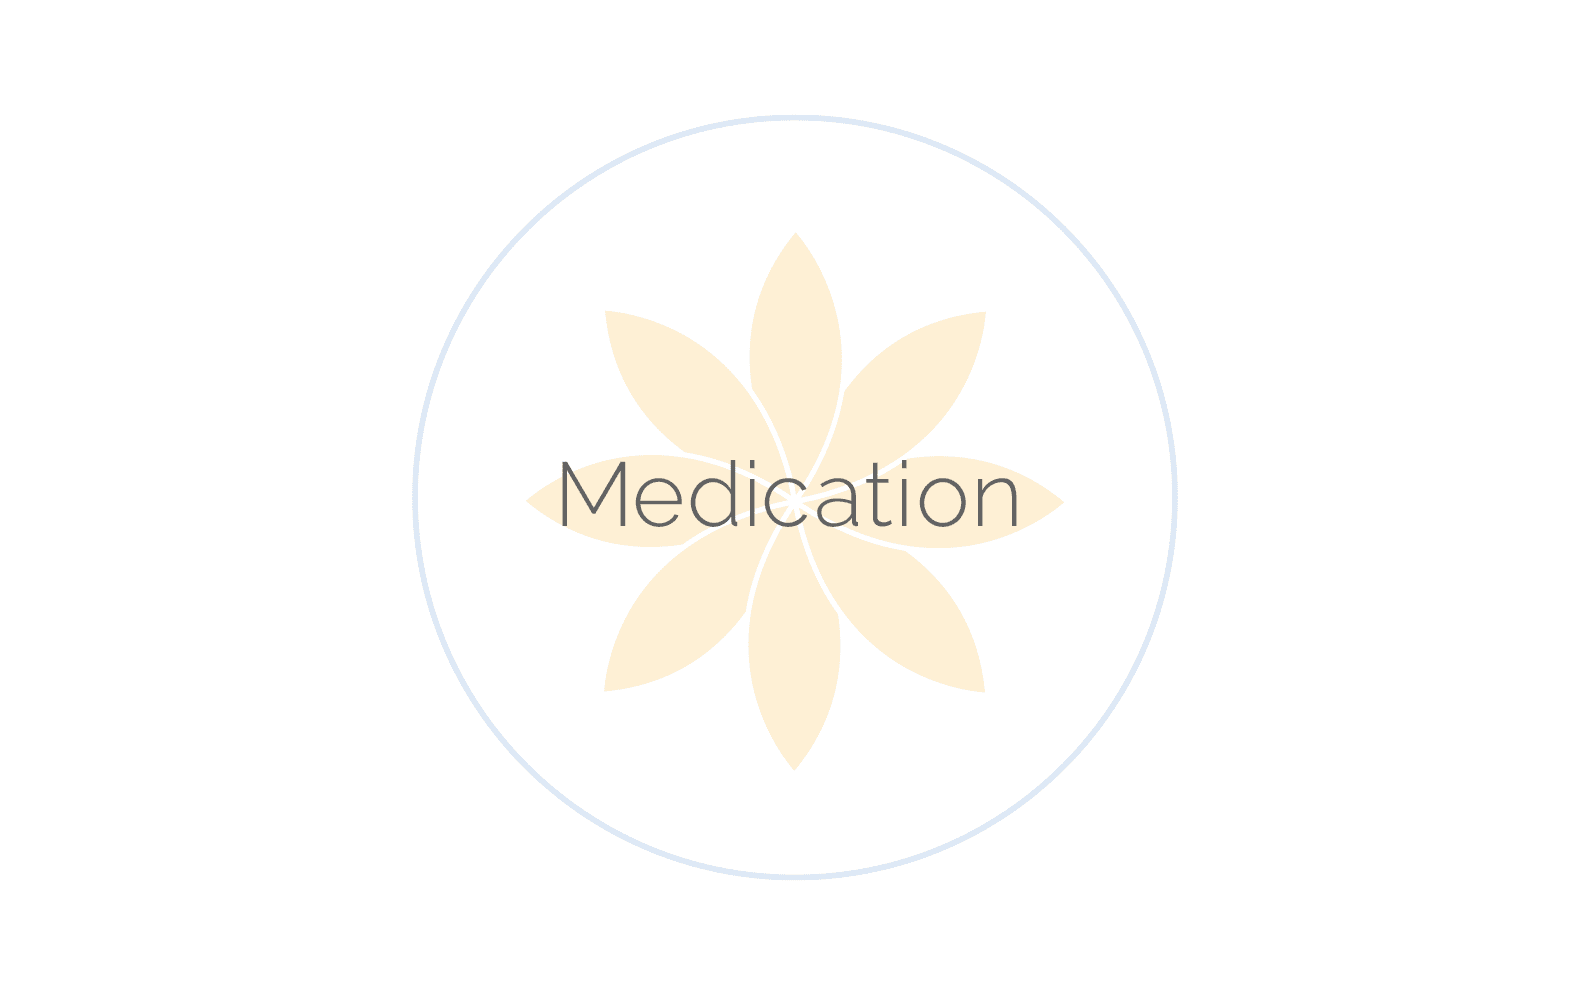 Hesitant about starting medication?